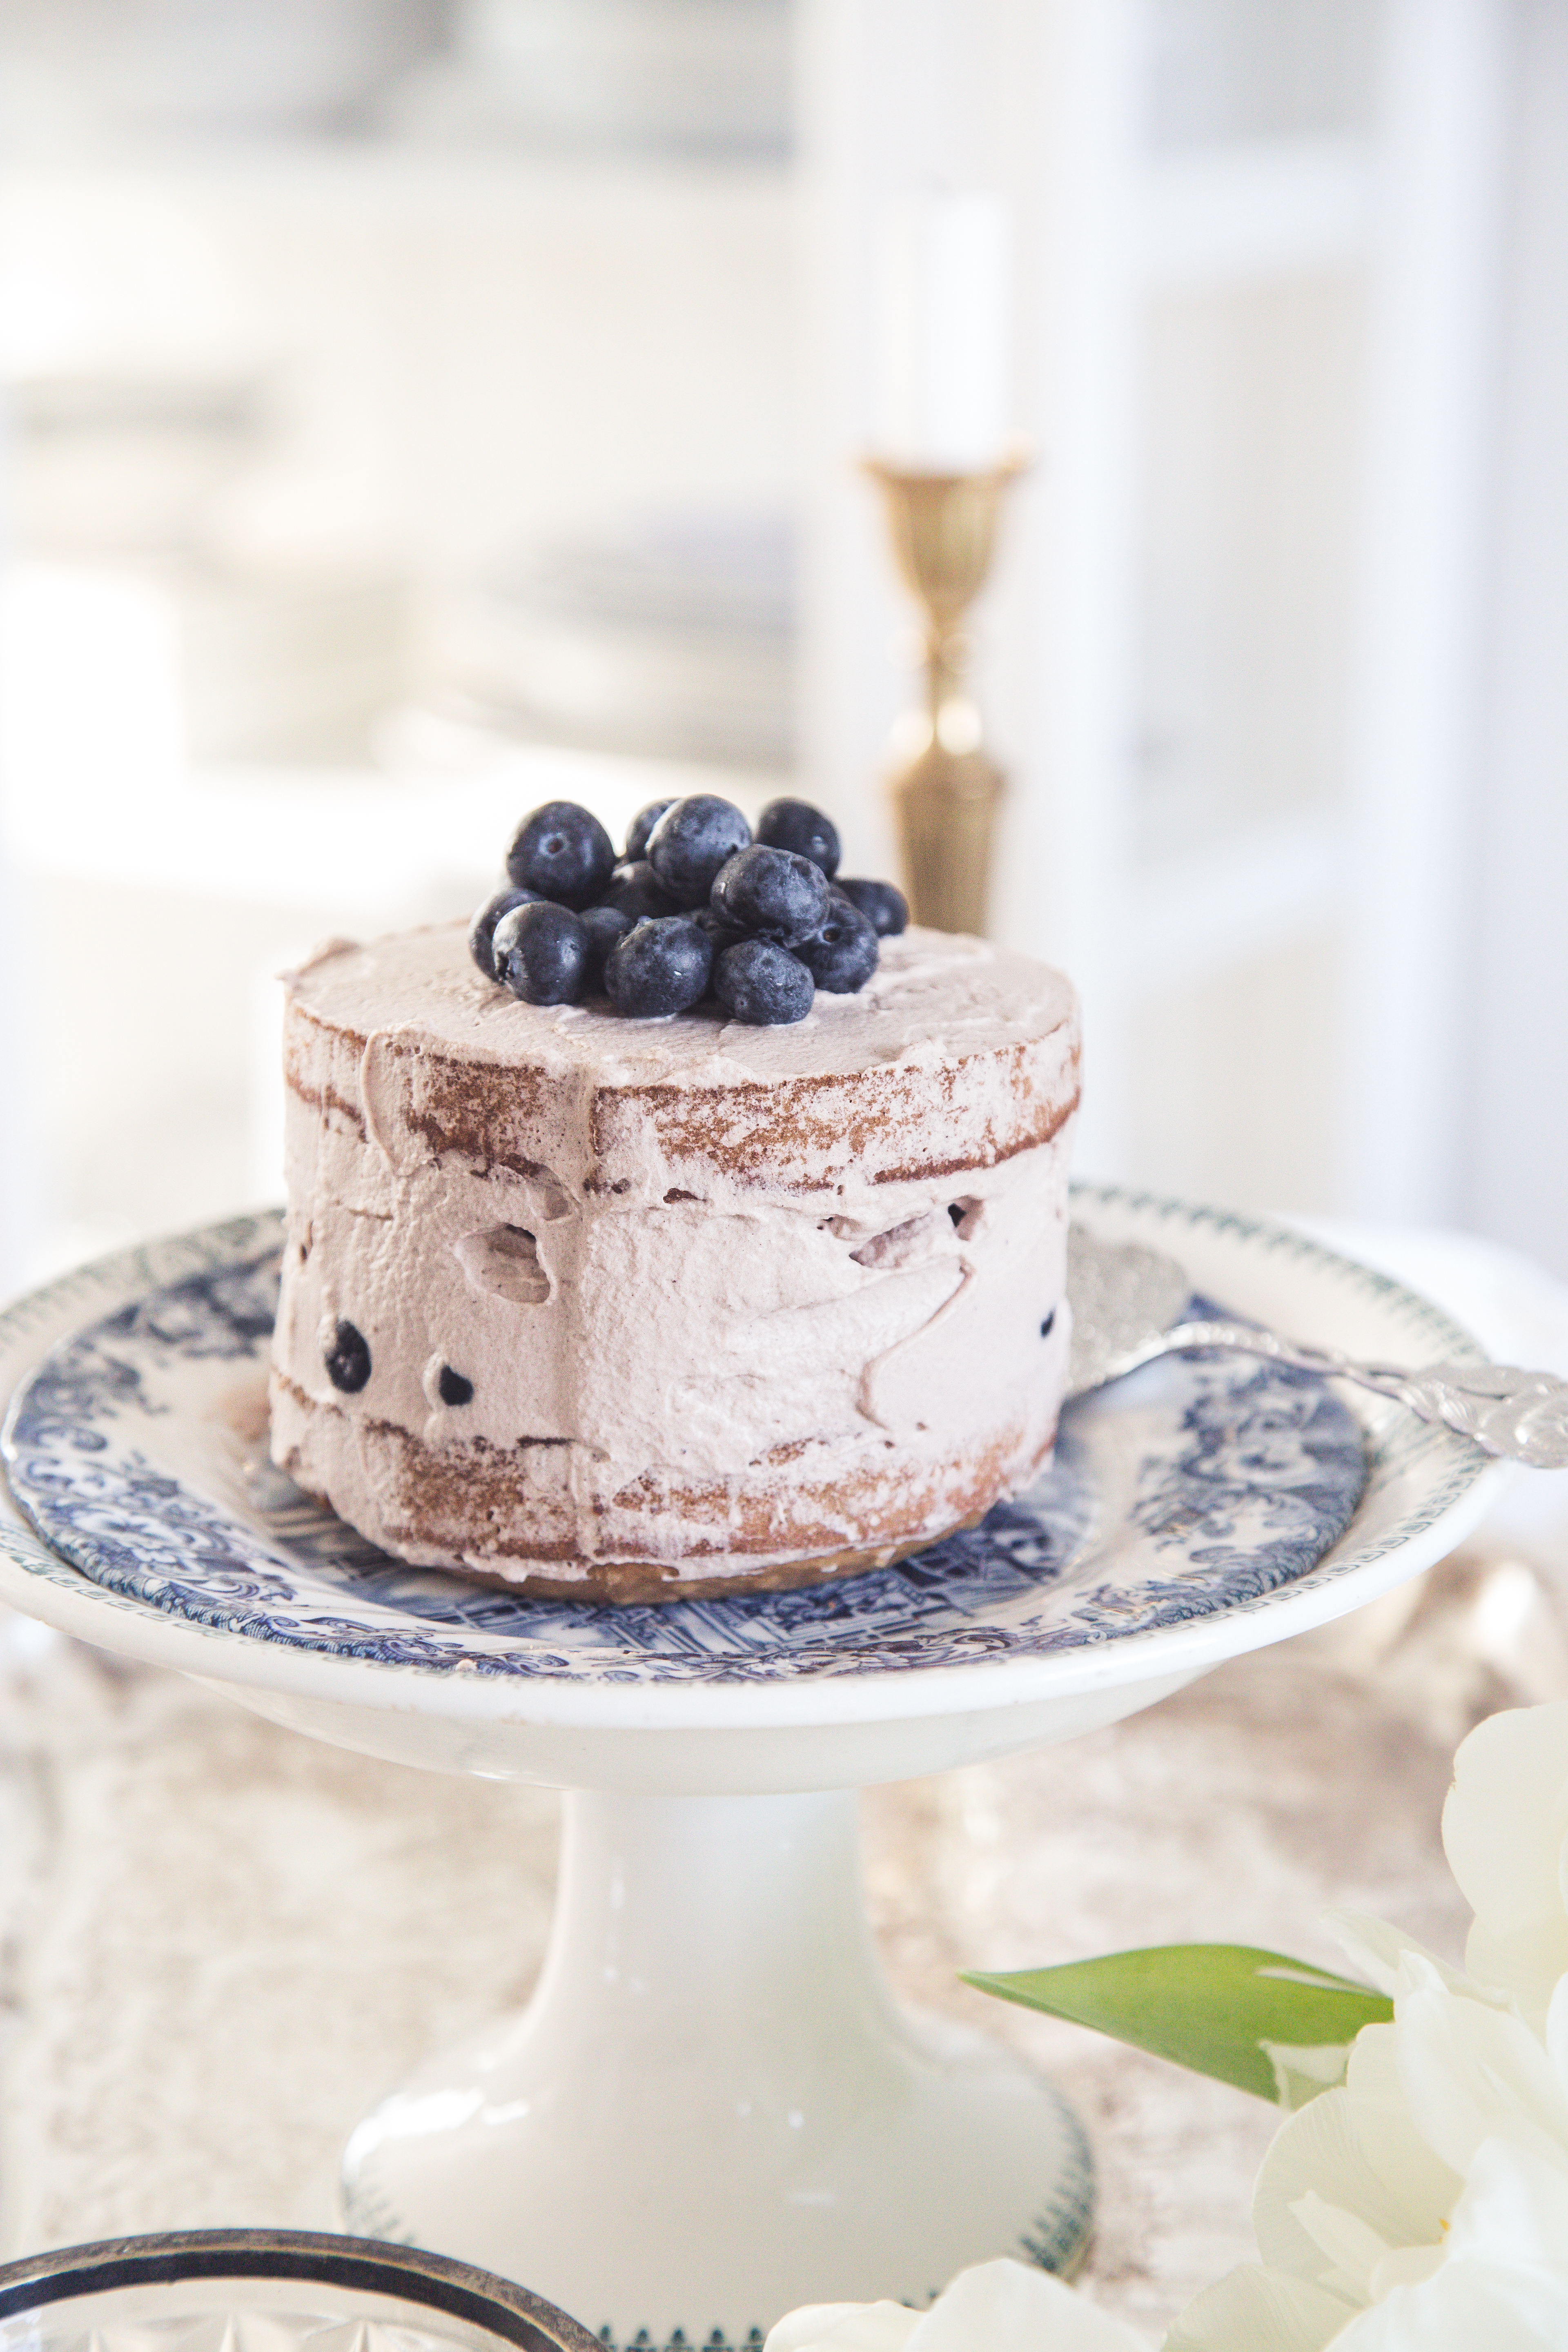 Airy chocolate Mousse & blueberry cake